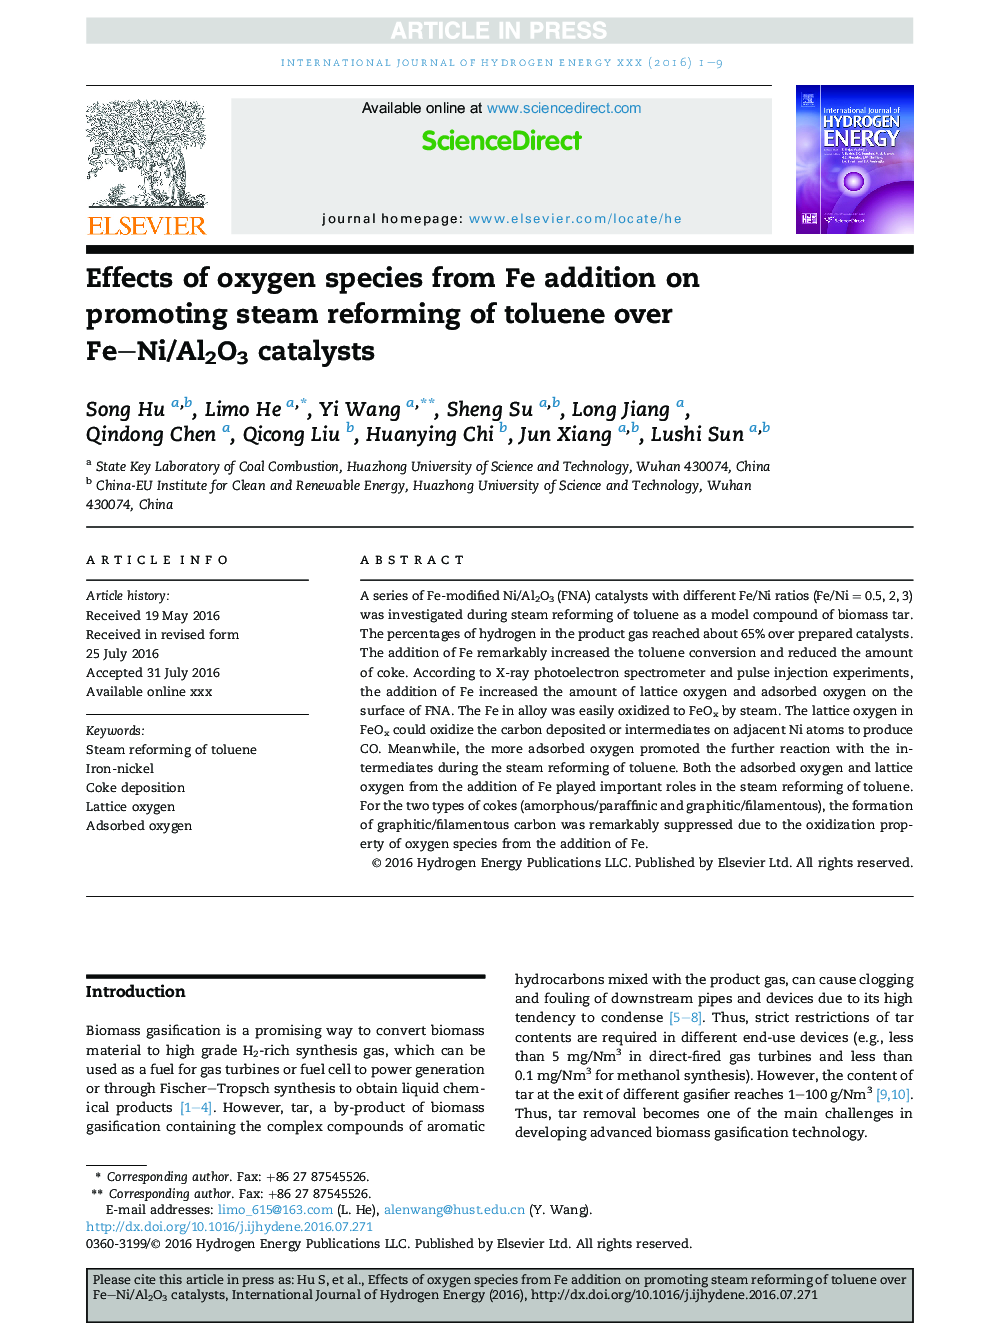 Effects of oxygen species from Fe addition on promoting steam reforming of toluene over Fe-Ni/Al2O3 catalysts